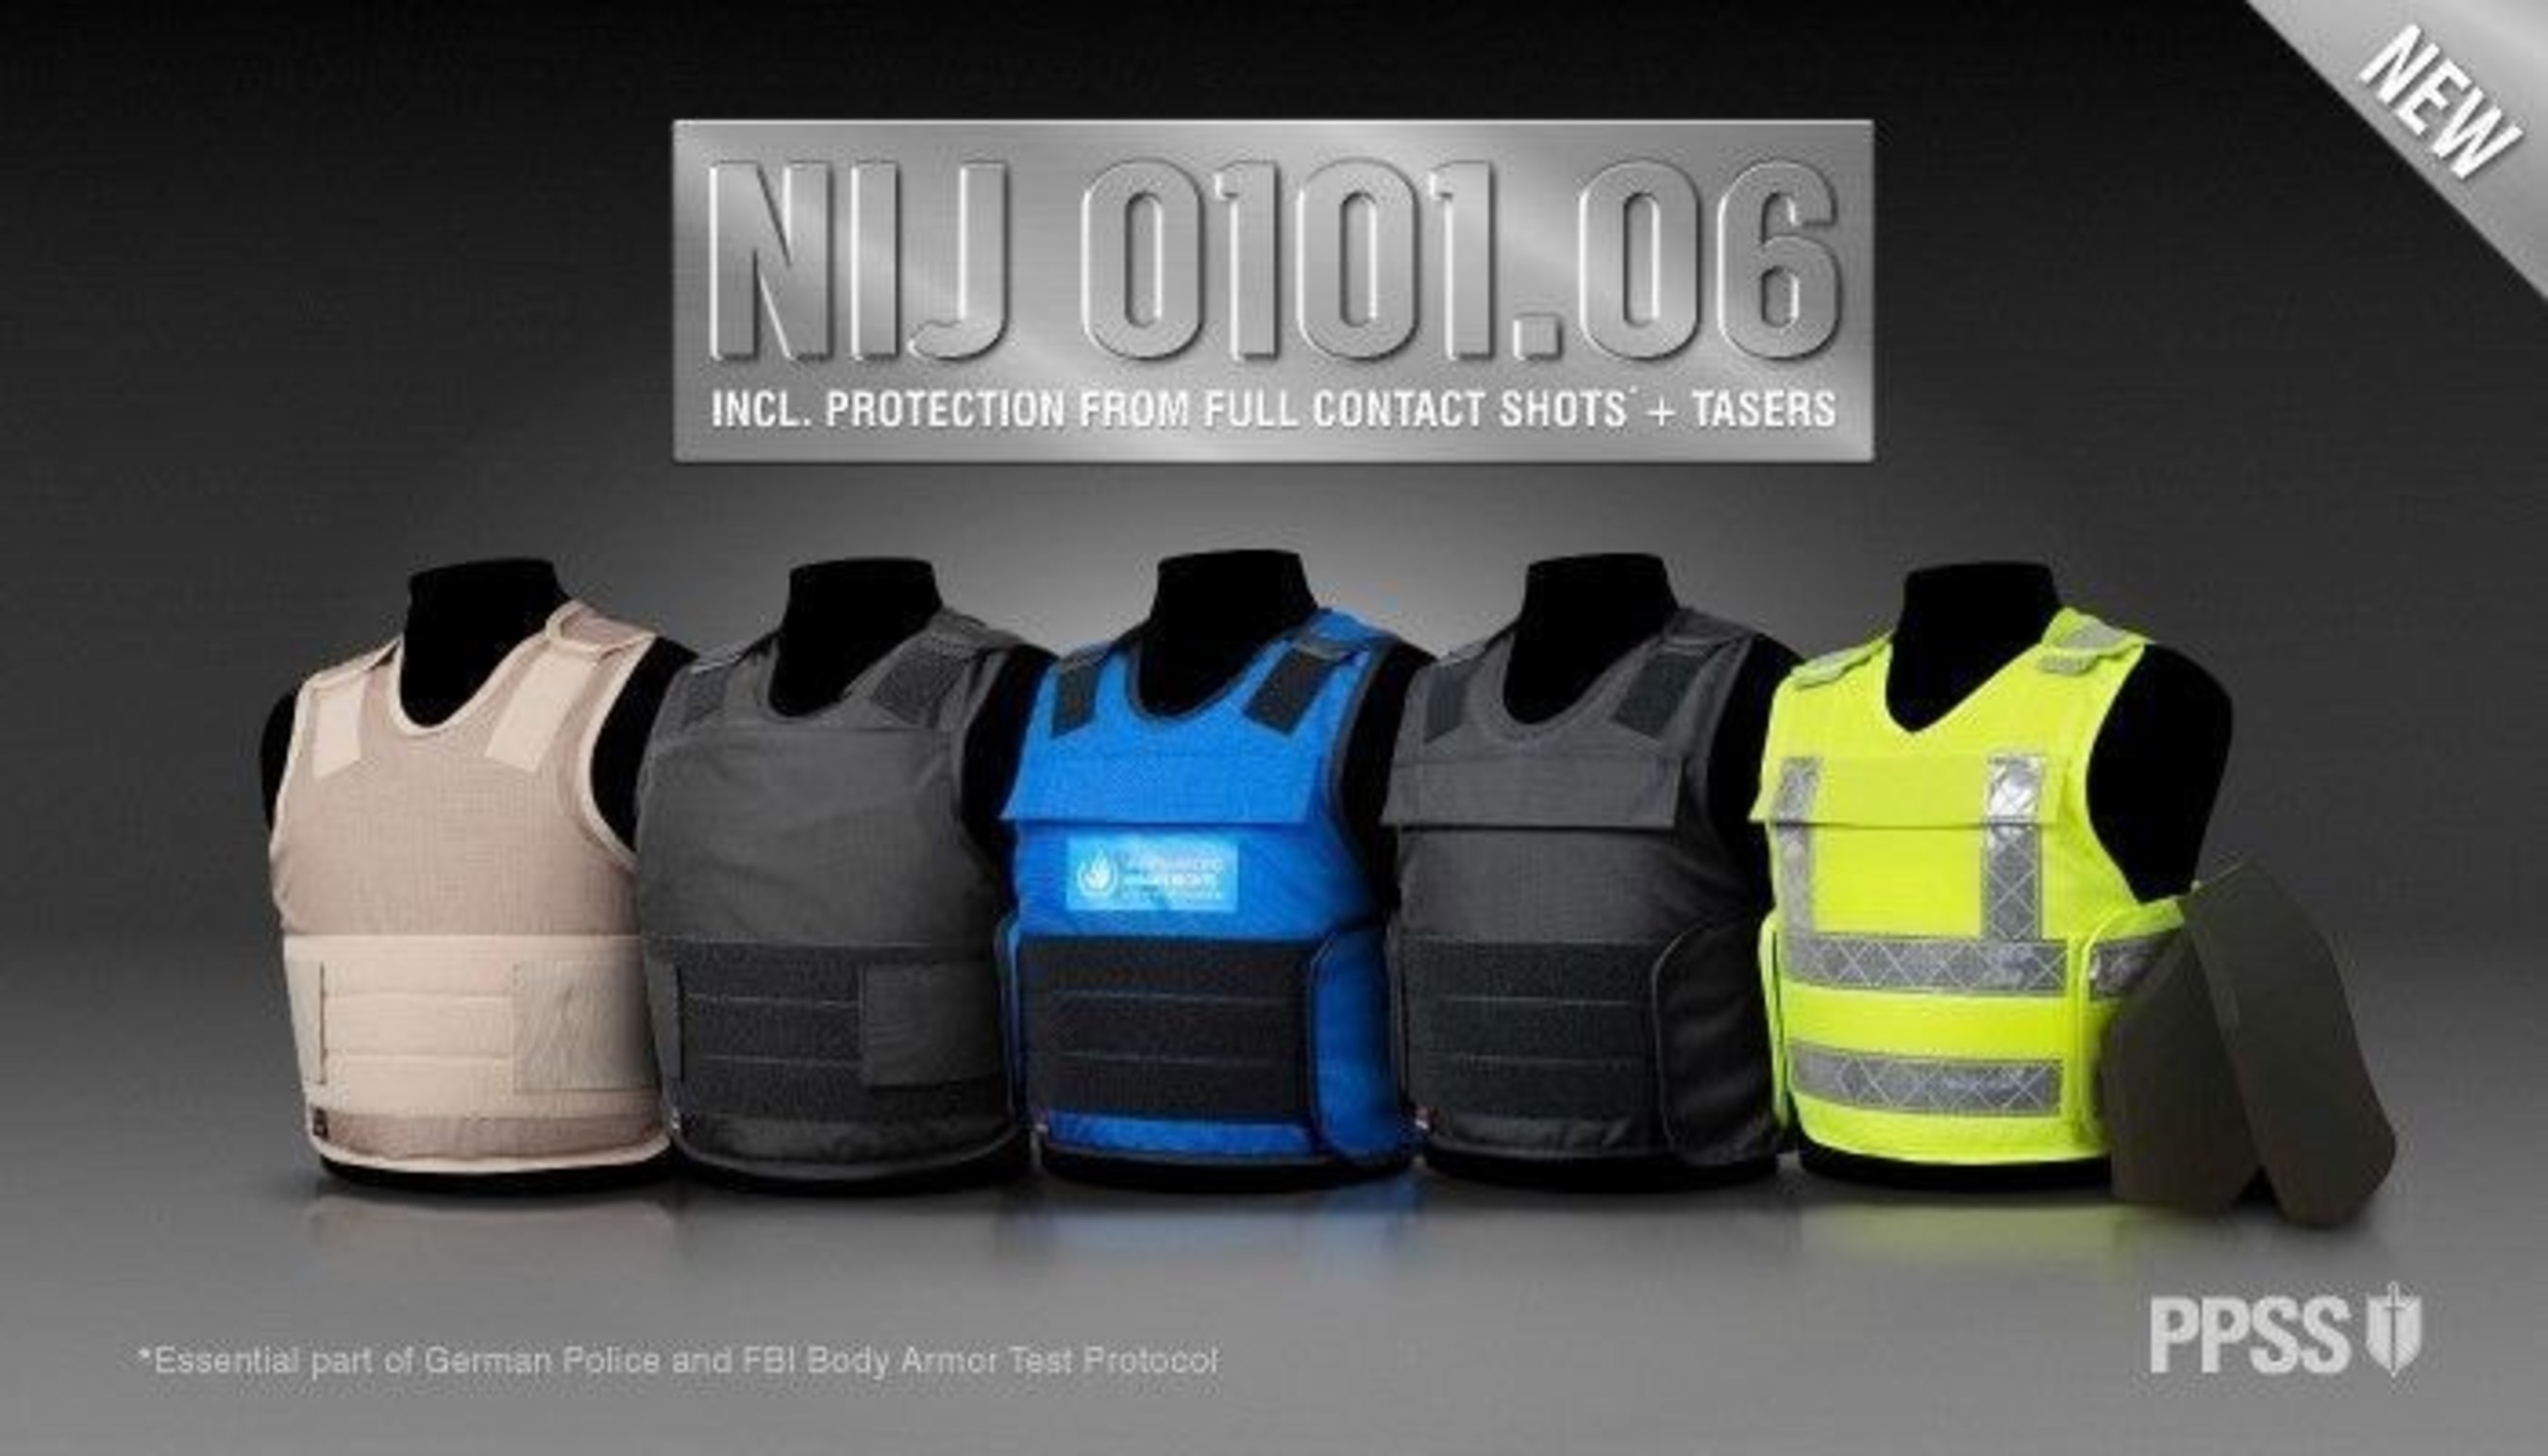 Latest Bullet Resistant Vest Also Protects From Full Contact Shots And TASER (PRNewsFoto/PPSS Group)